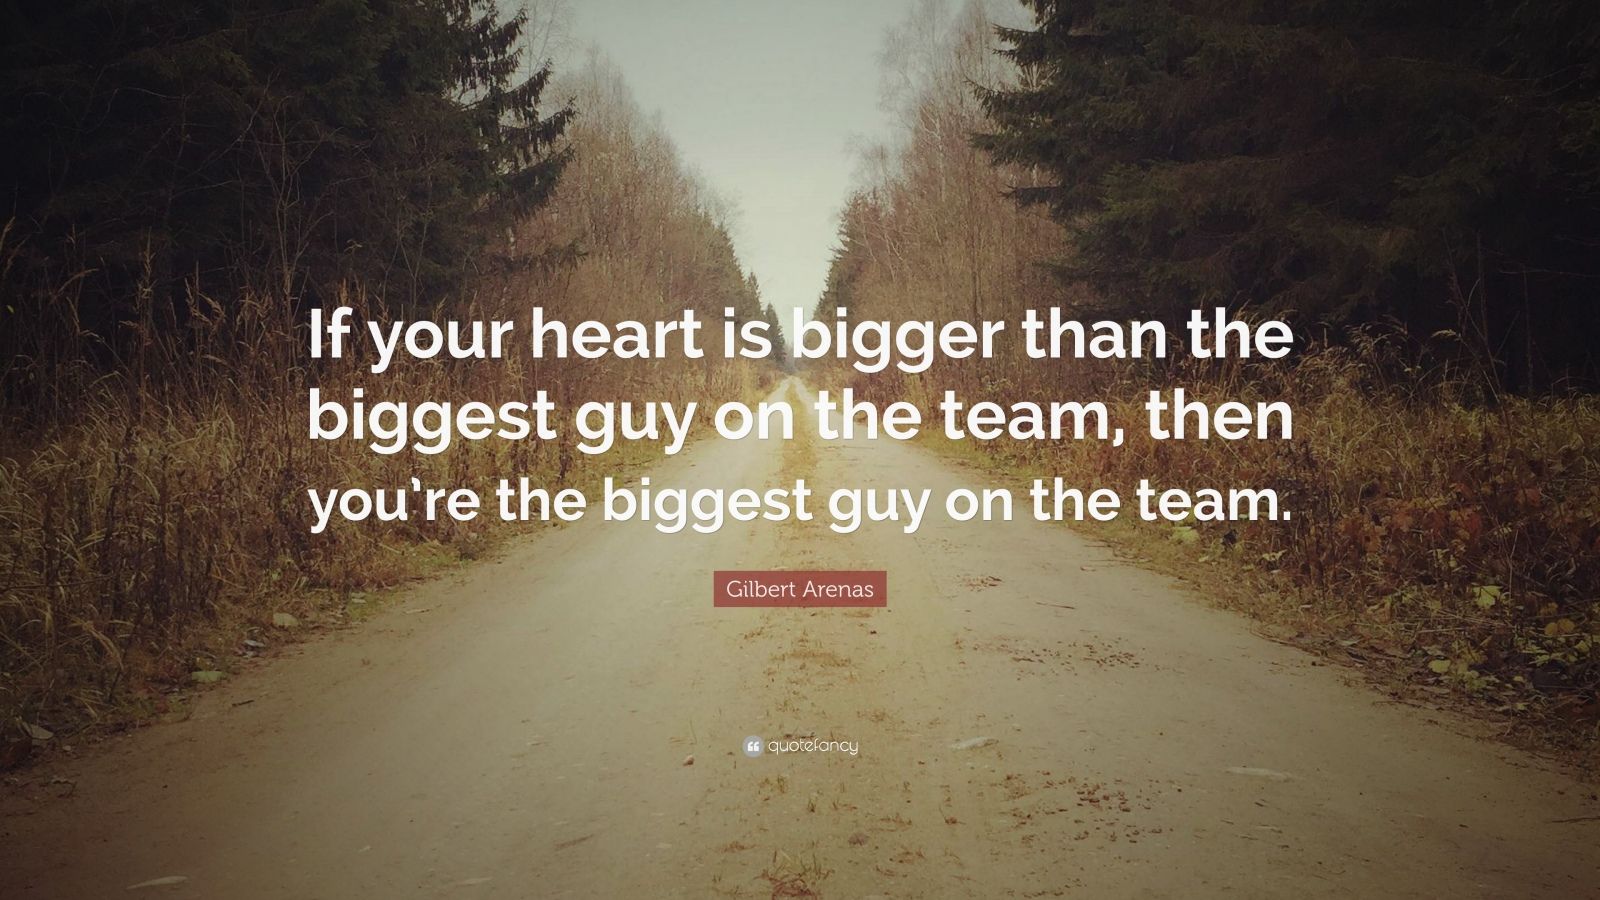 Gilbert Arenas Quote: “If your heart is bigger than the biggest guy on